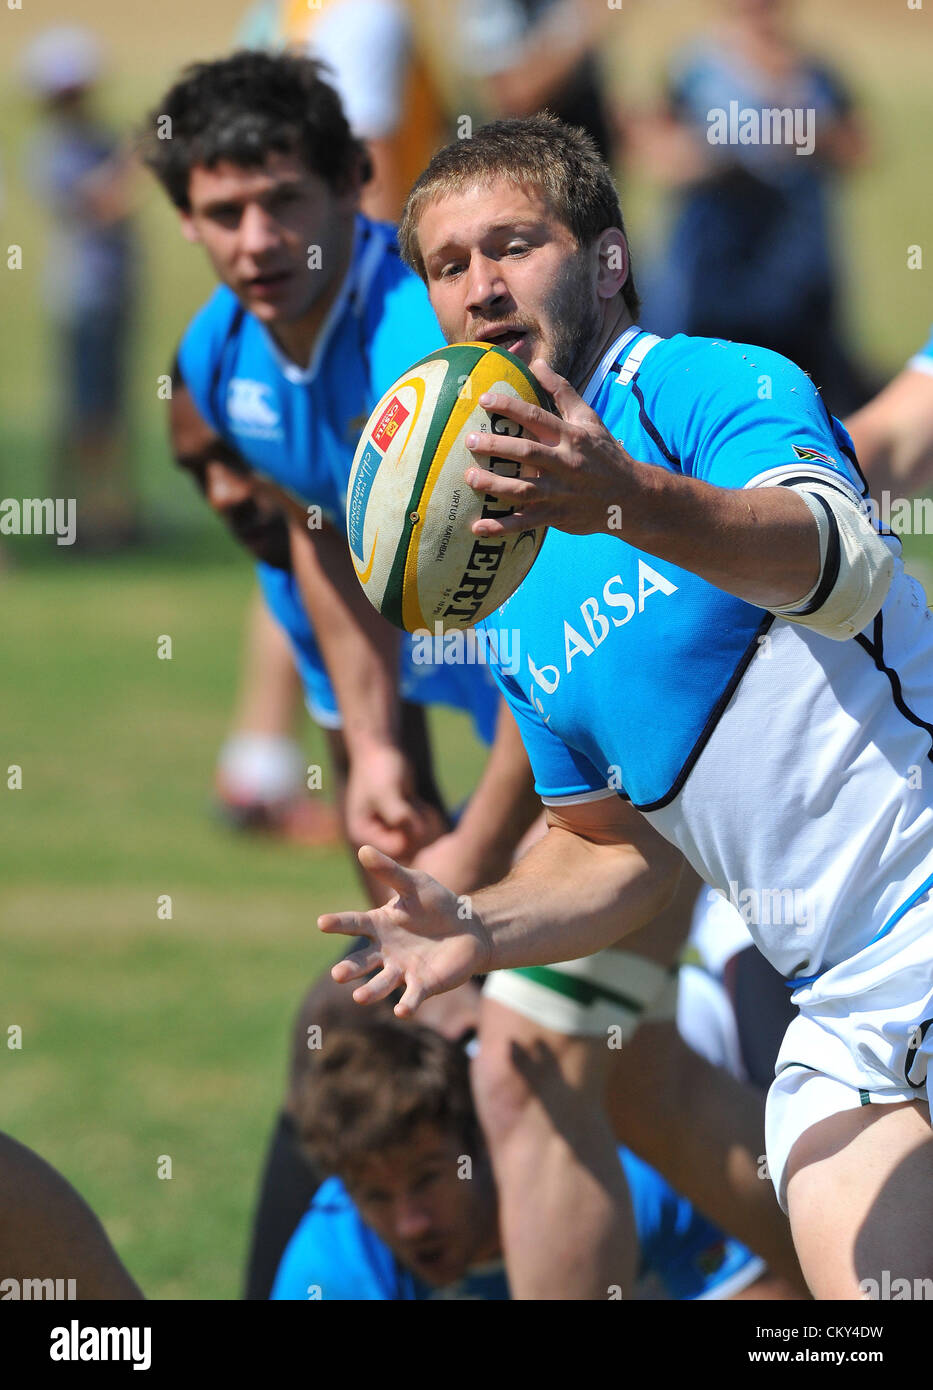 JOHANNESBURG, SOUTH AFRICA - SEPTEMBER 01, Frans Steyn receives the ball during the South African national rugby team field session and media conference at KES on September 01, 2012 in Johannesburg, South Africa Photo by Duif du Toit / Gallo Images Stock Photo